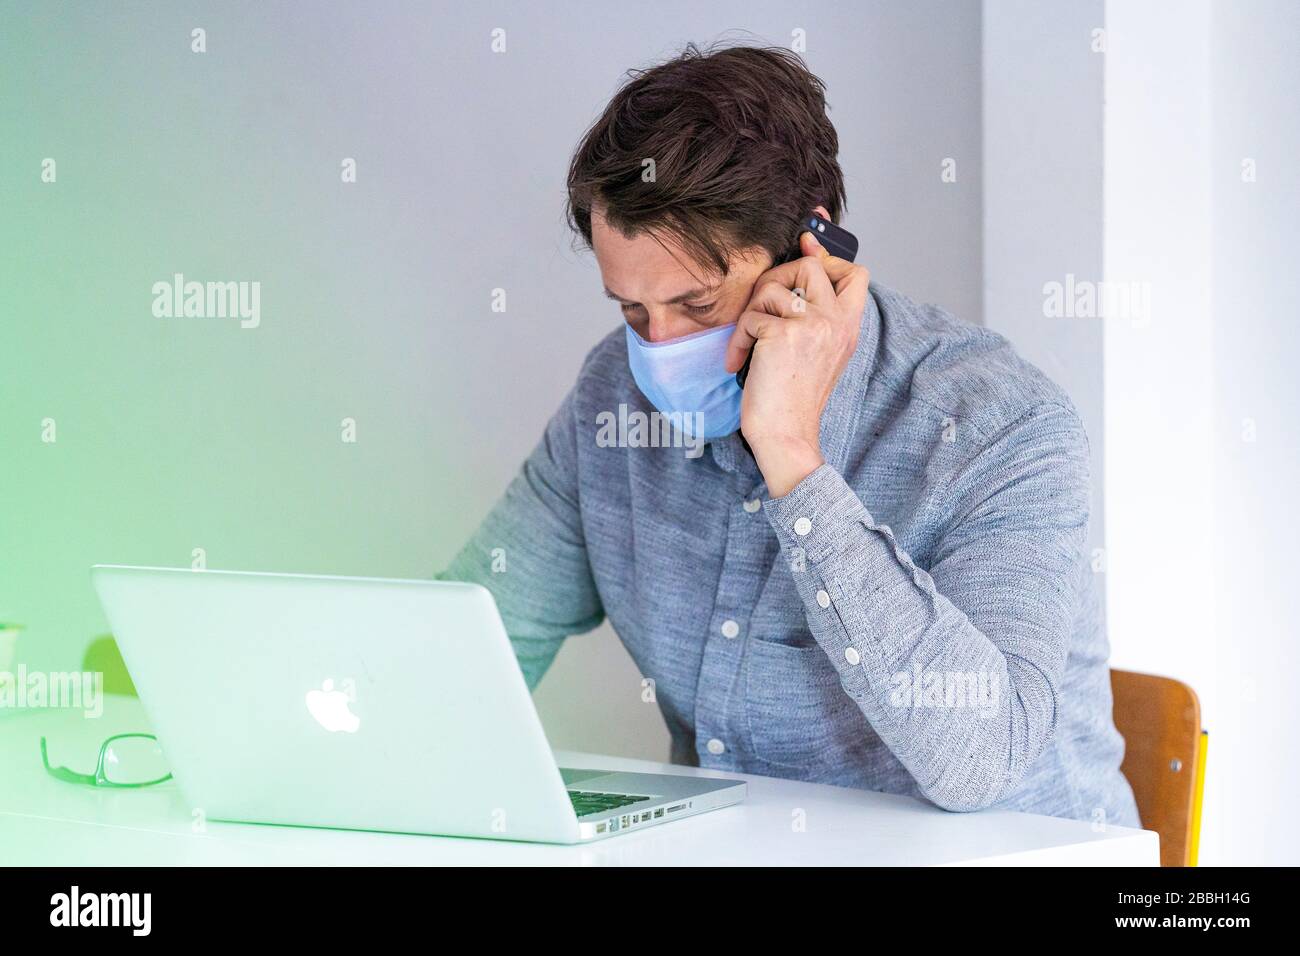 Mid 40's male working from home with Apple laptop, wearing face mask. Stock Photo